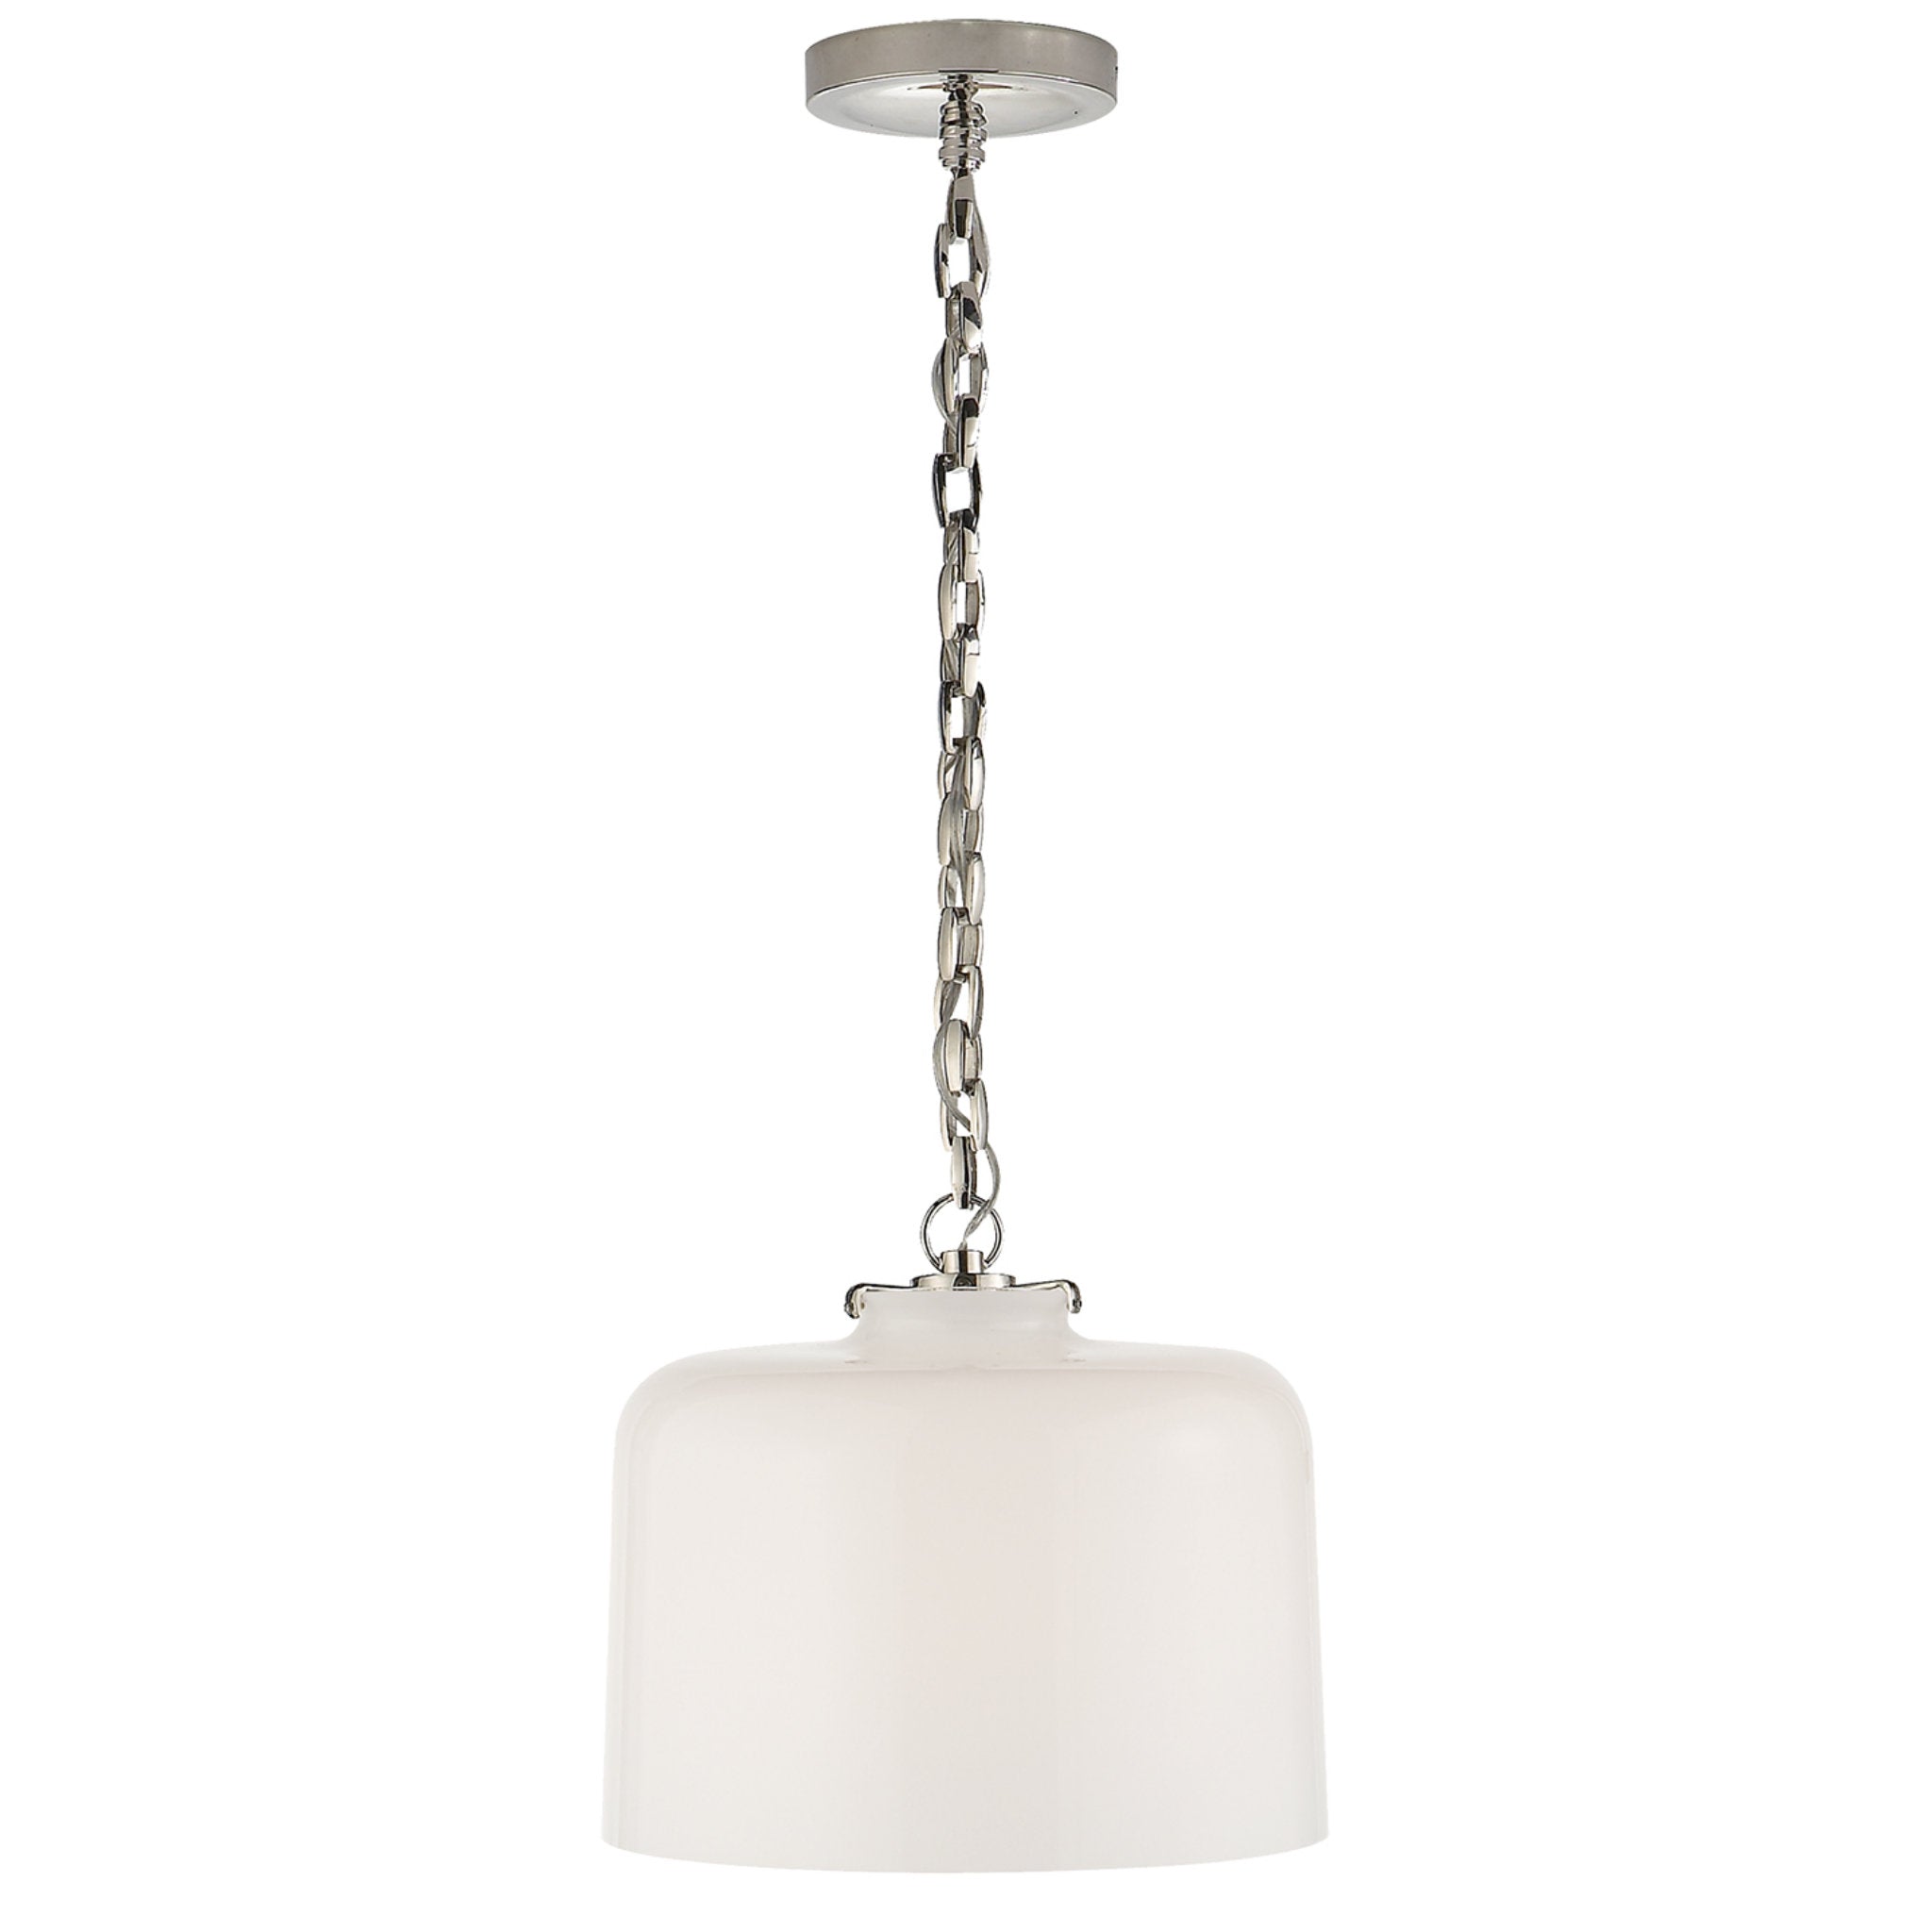 Thomas O'Brien Katie Dome Pendant in Polished Nickel with White Glass